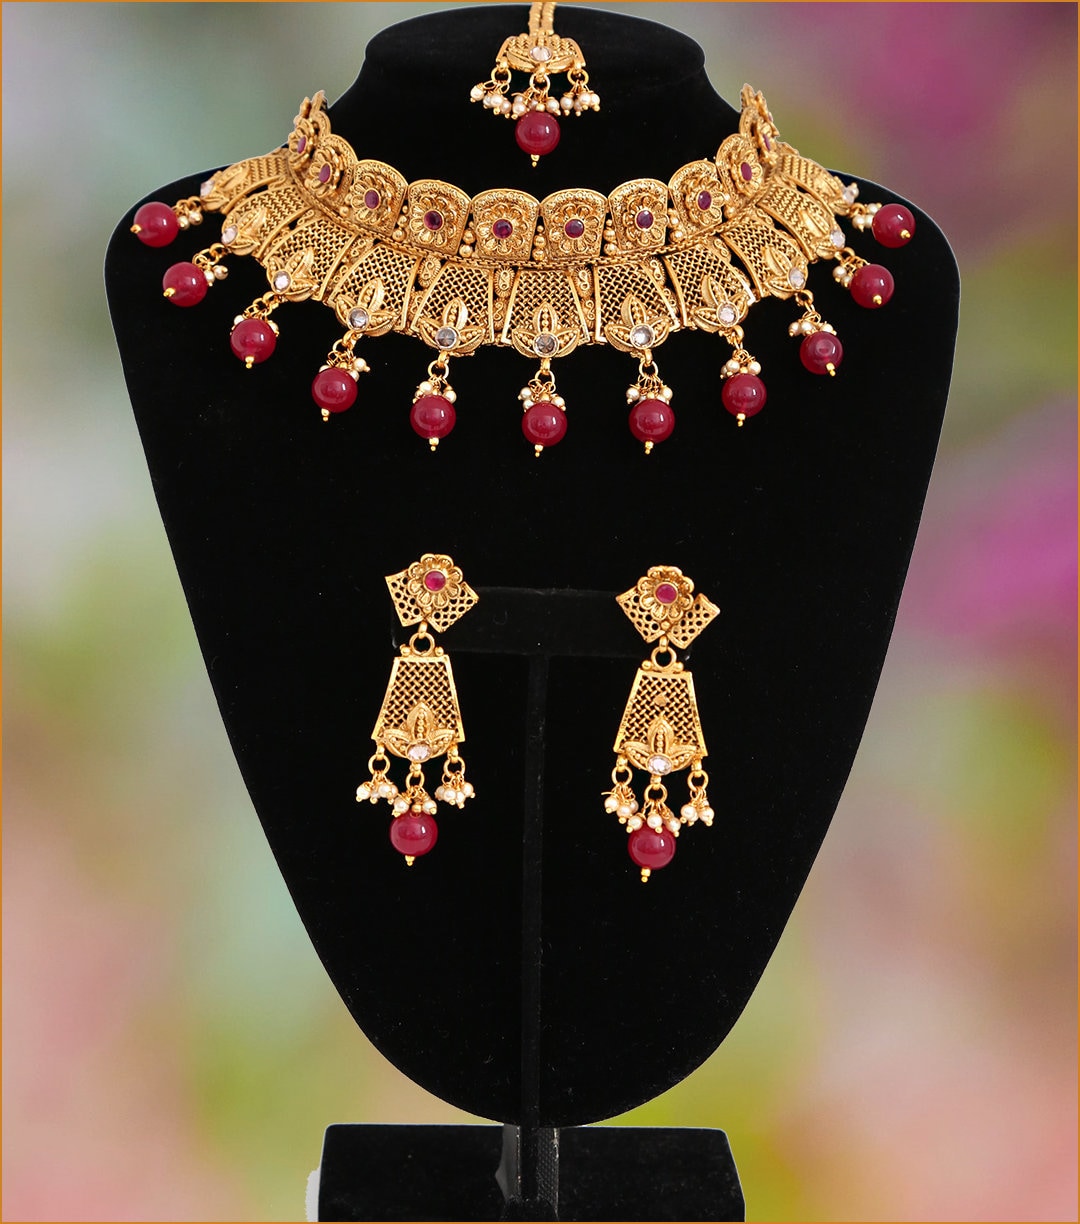 Indian Bridal Jewelry necklace with Matching earrings and Maang Tikka Kundan|Antique Gold Kundan Polki Wedding Jewelry|Ruby Round Stones